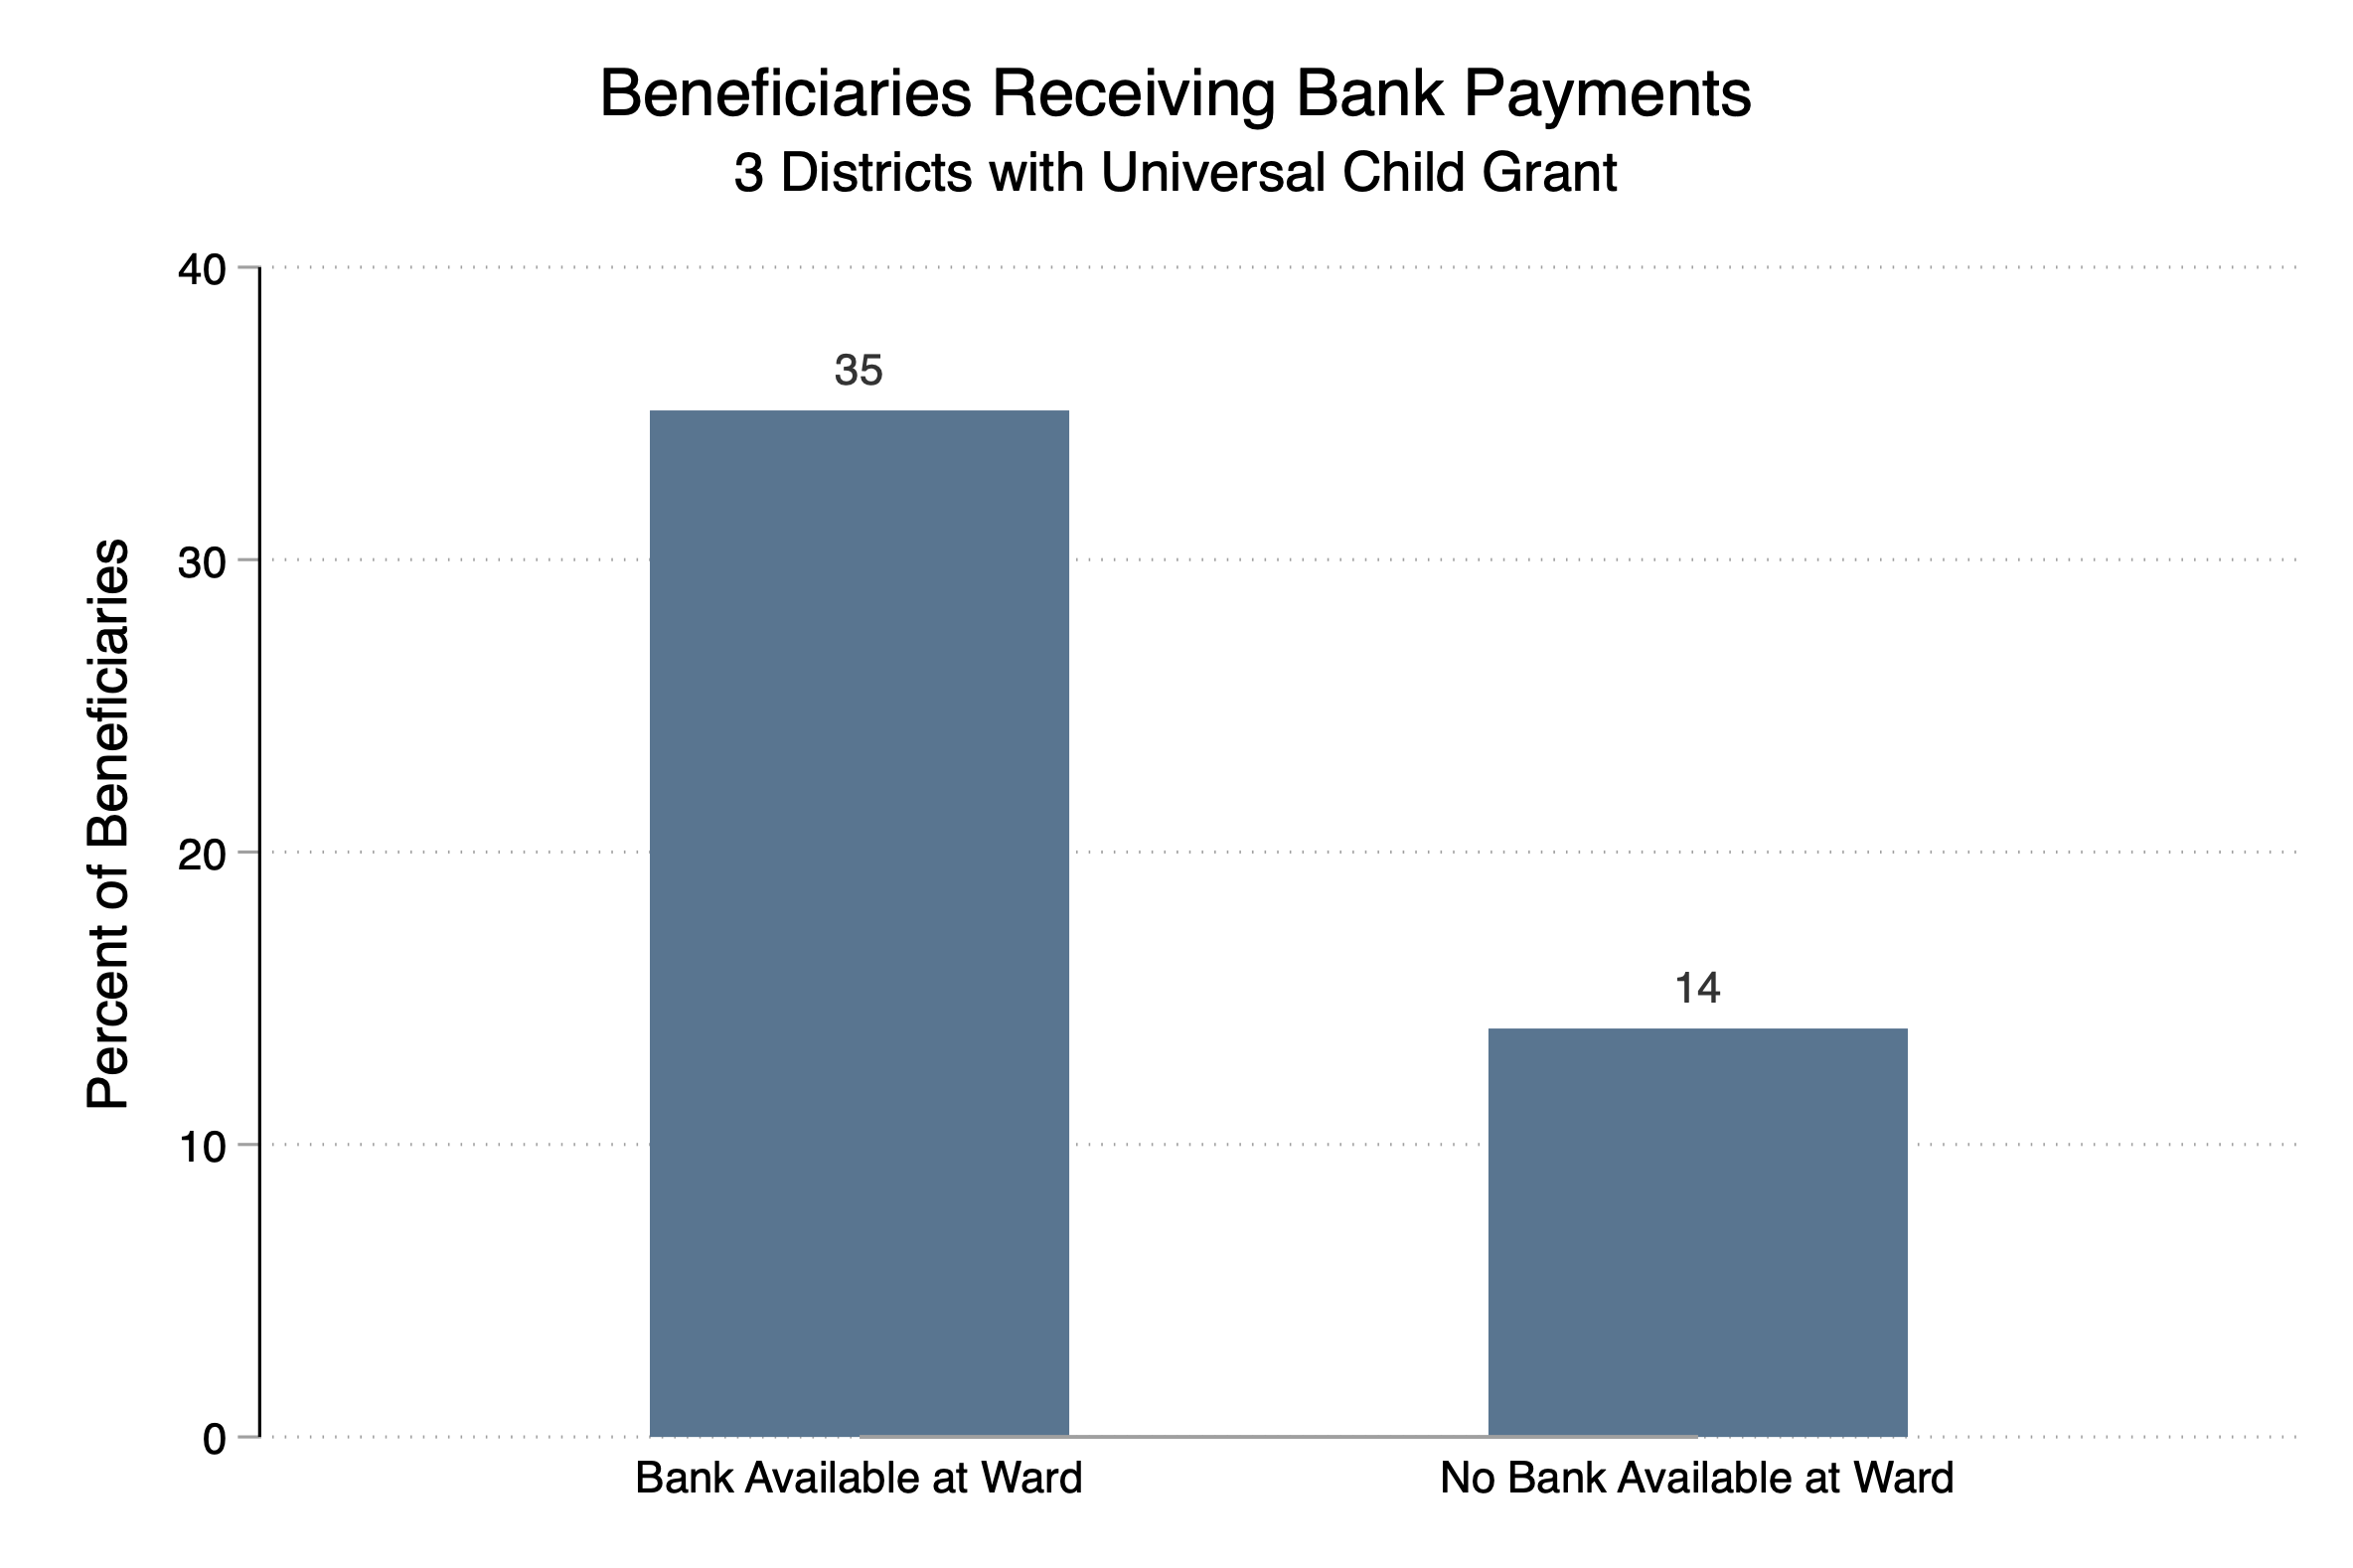 Bar graph of beneficiaries receiving bank payments